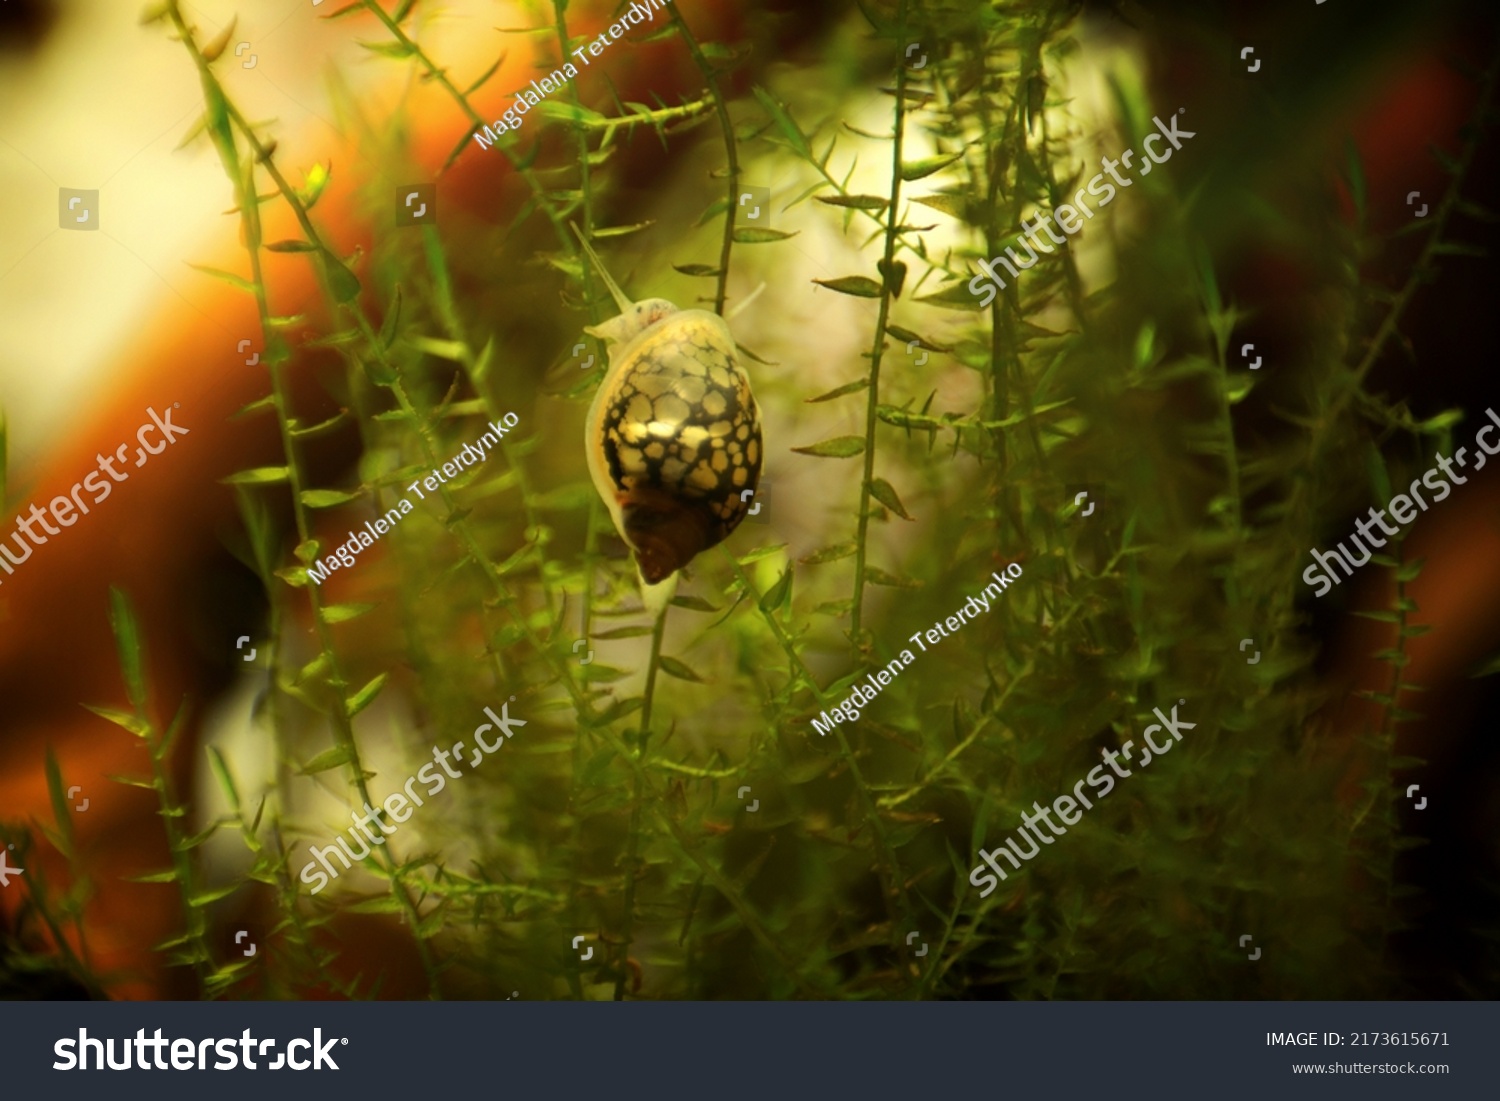 Physidae snail, bladder snails, family of air breathing freshwater snails, aquatic pulmonate gastropod molluscs. Aquascaping Animal macro close up photography with a focus gradient, soft background. #2173615671